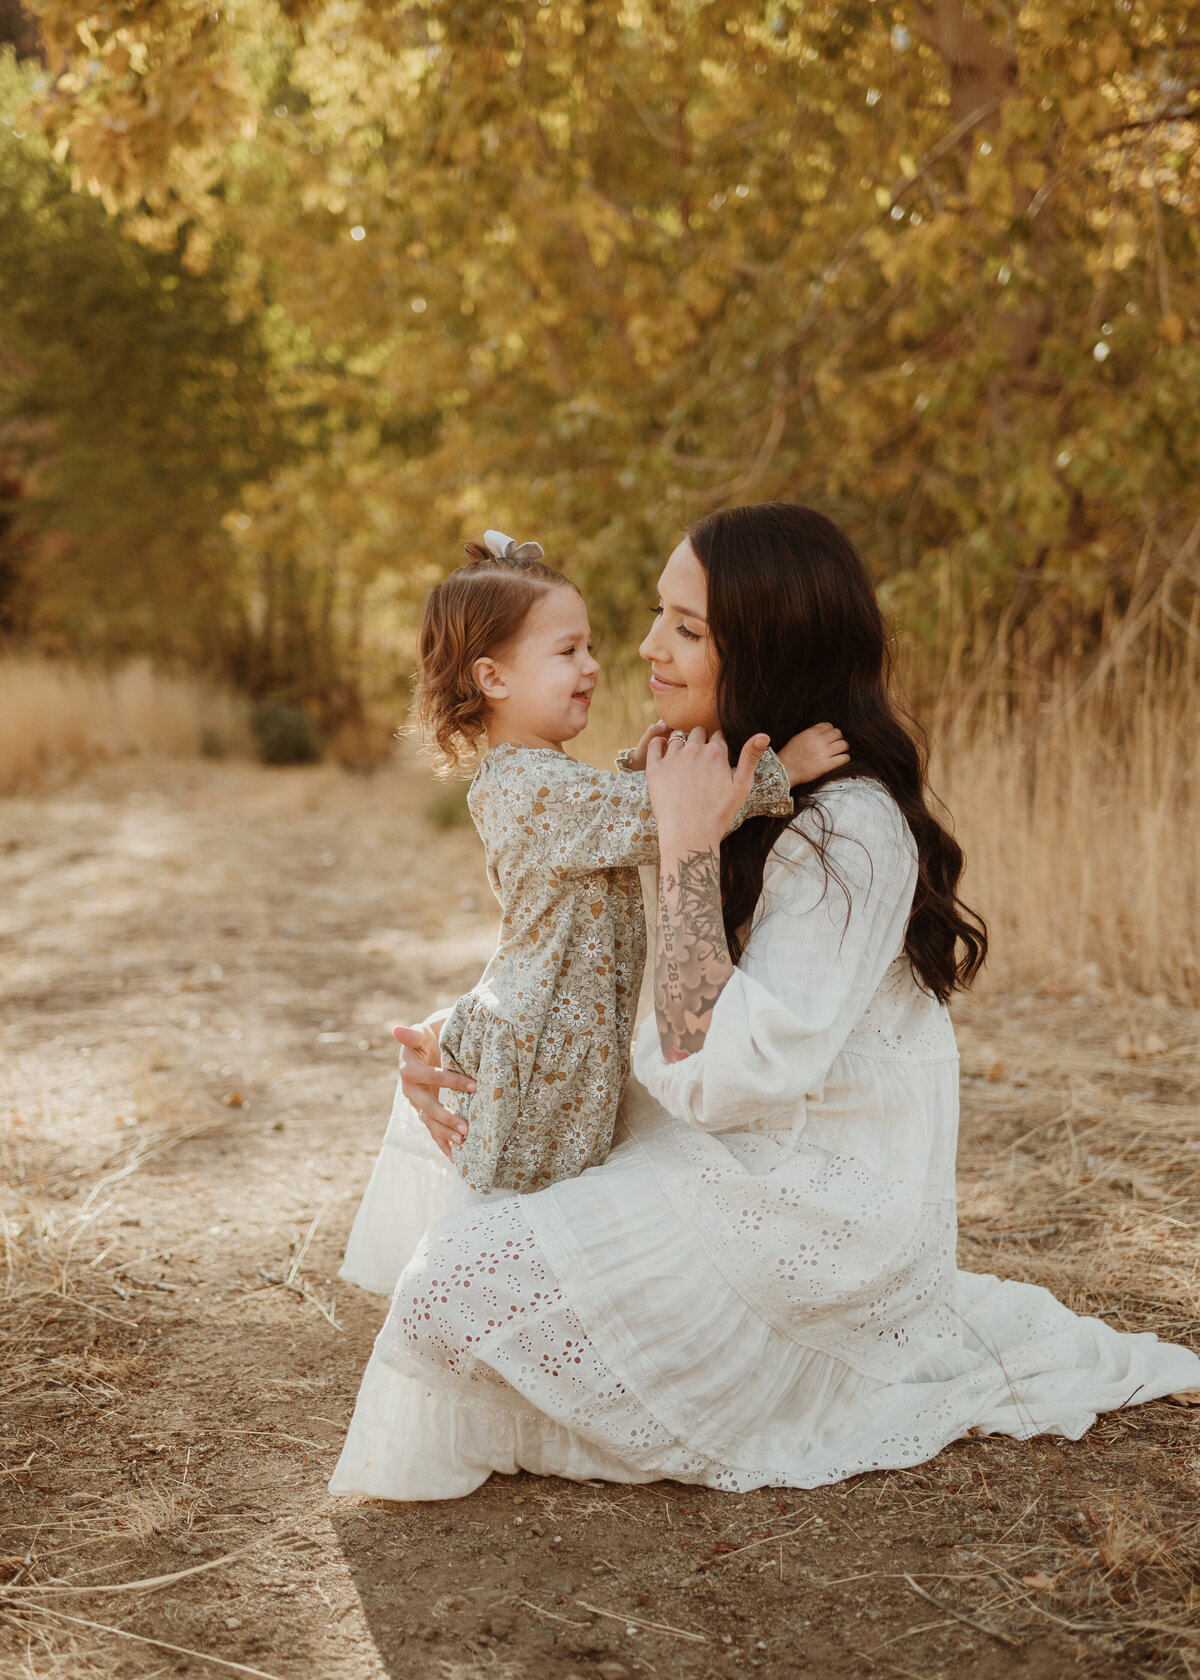 wenatchee natural light photographer - abbygale marie photography